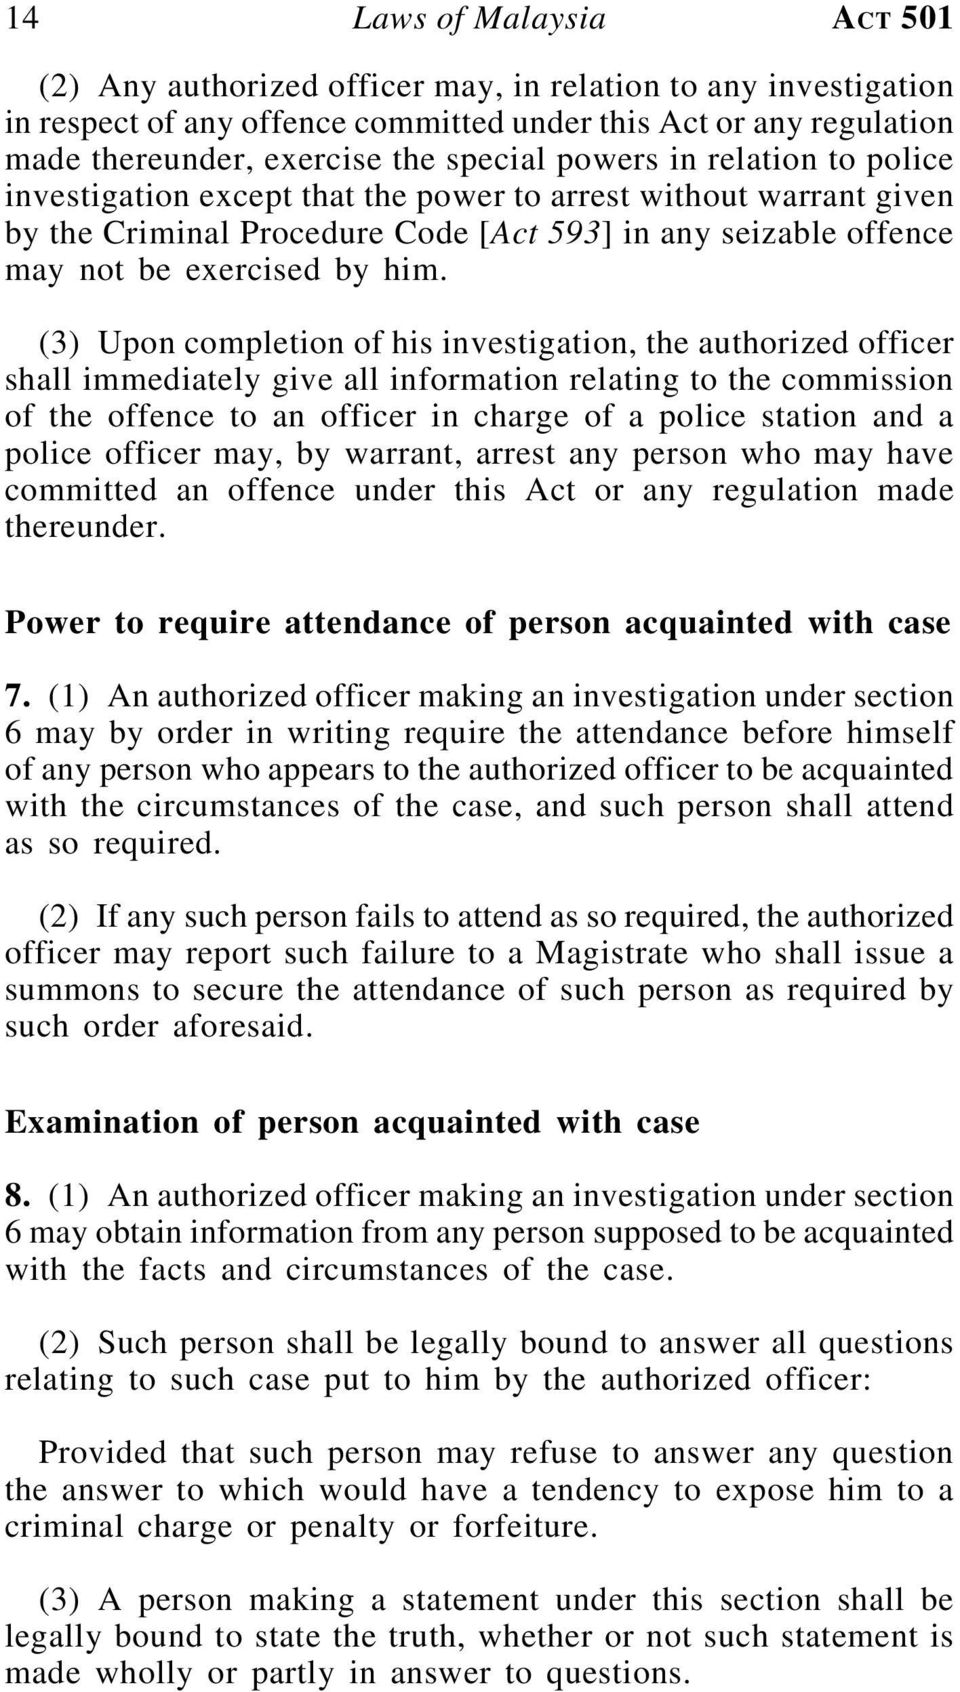 (3) Upon completion of his investigation, the authorized officer shall immediately give all information relating to the commission of the offence to an officer in charge of a police station and a